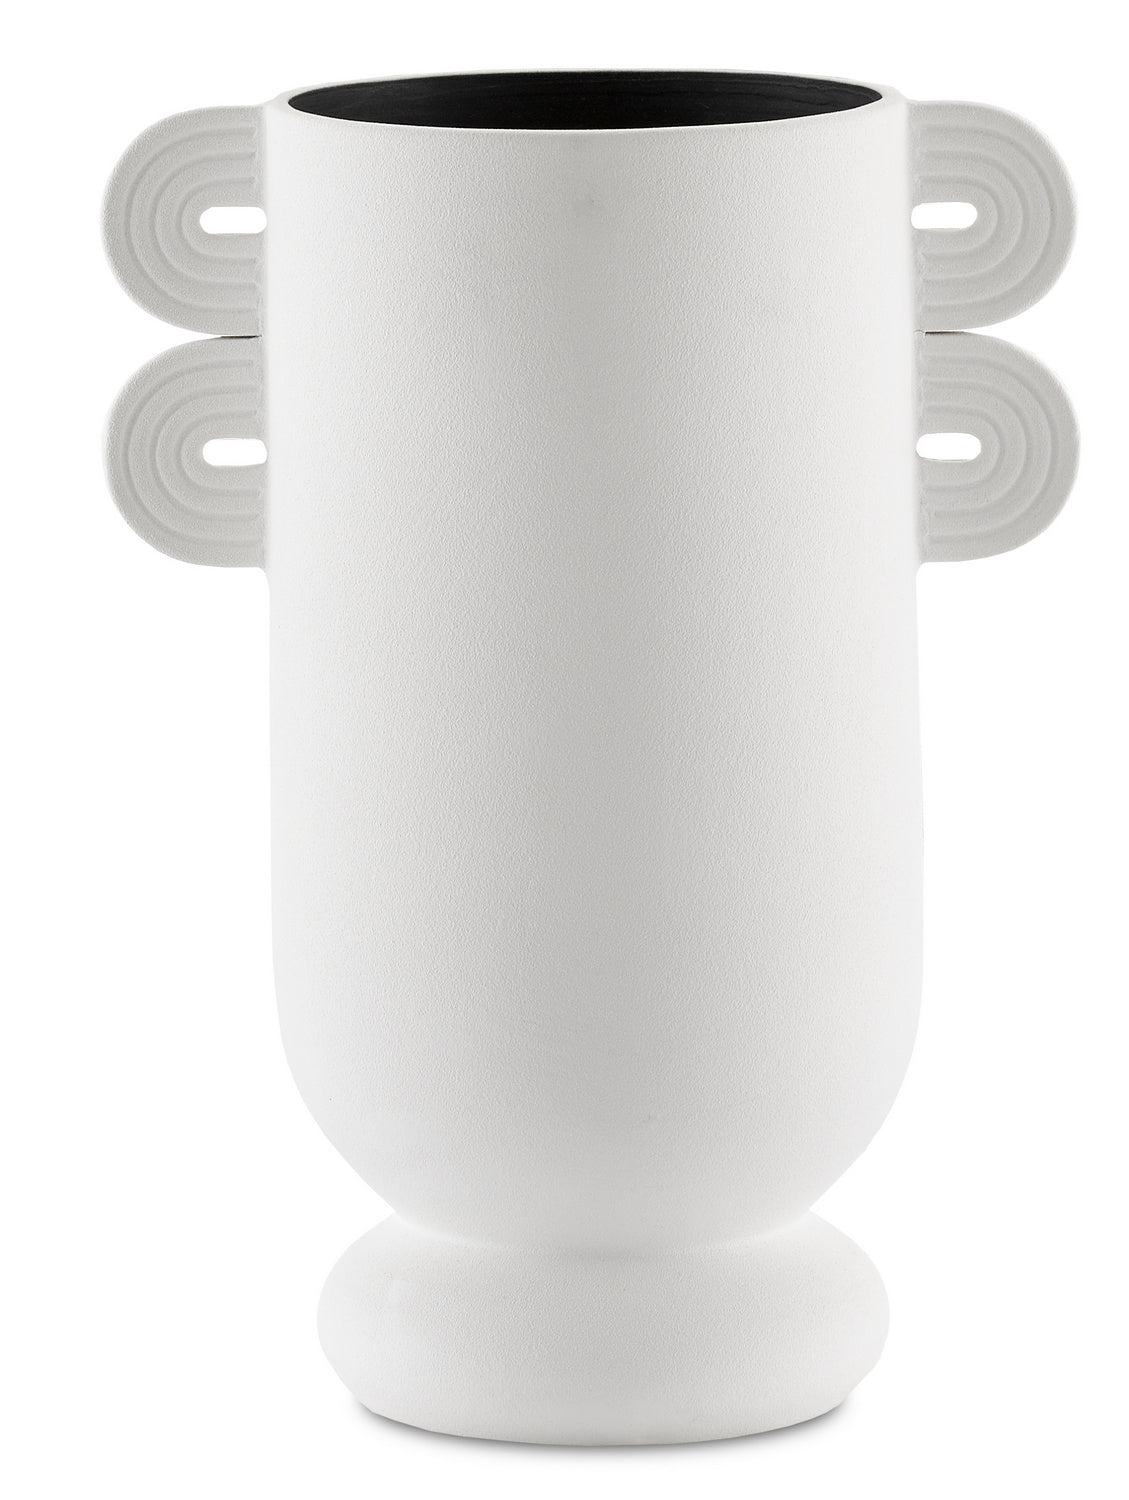 Vase from the Happy collection in Textured White finish